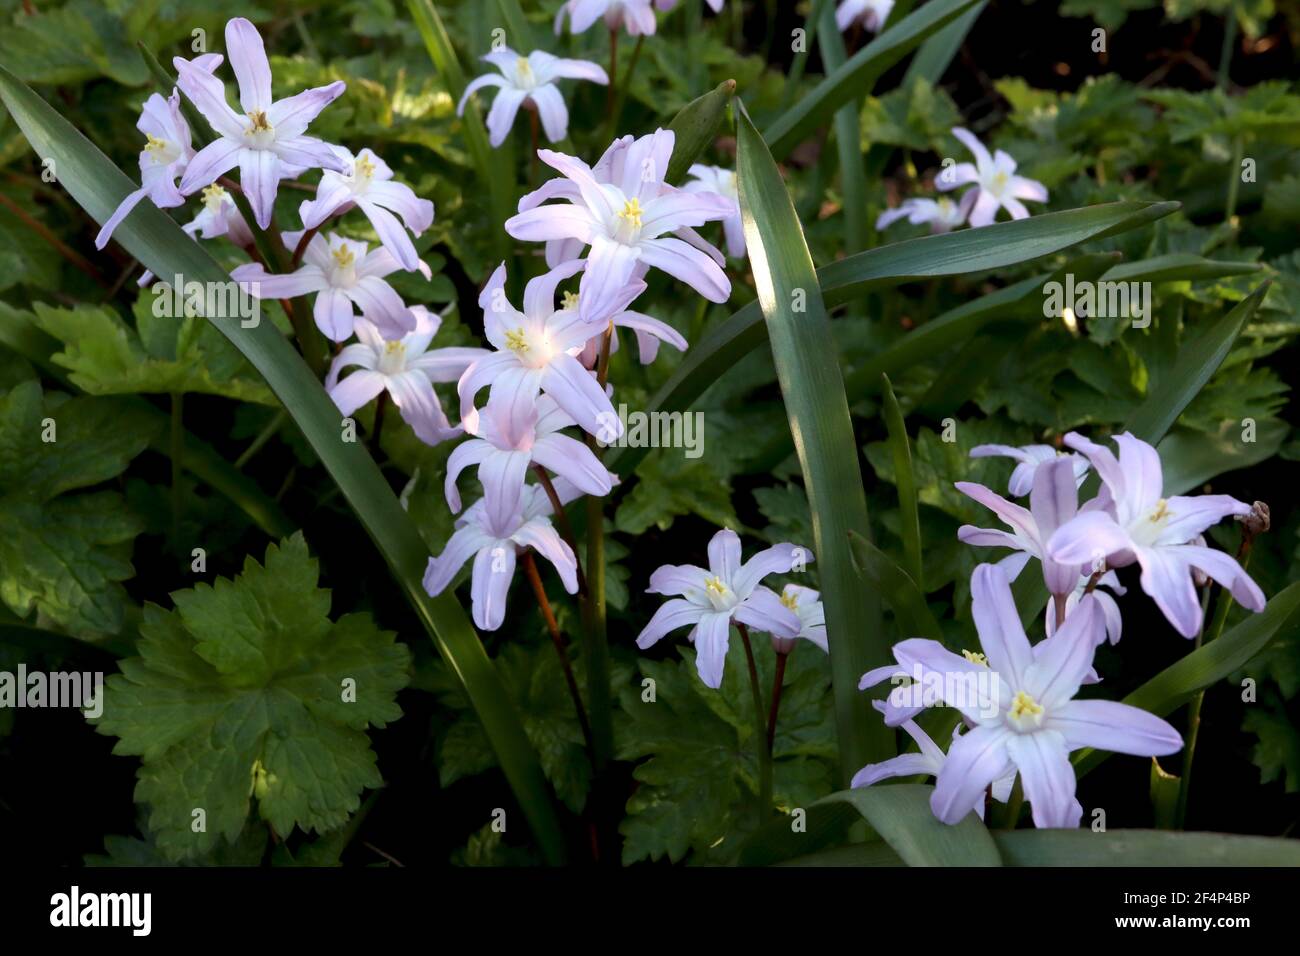 Scilla forbesii chionodoxa ‘Pink Giant’ Squill Pink Giant – shell pink star-shaped flowers with a white centre,   March, England, UK Stock Photo